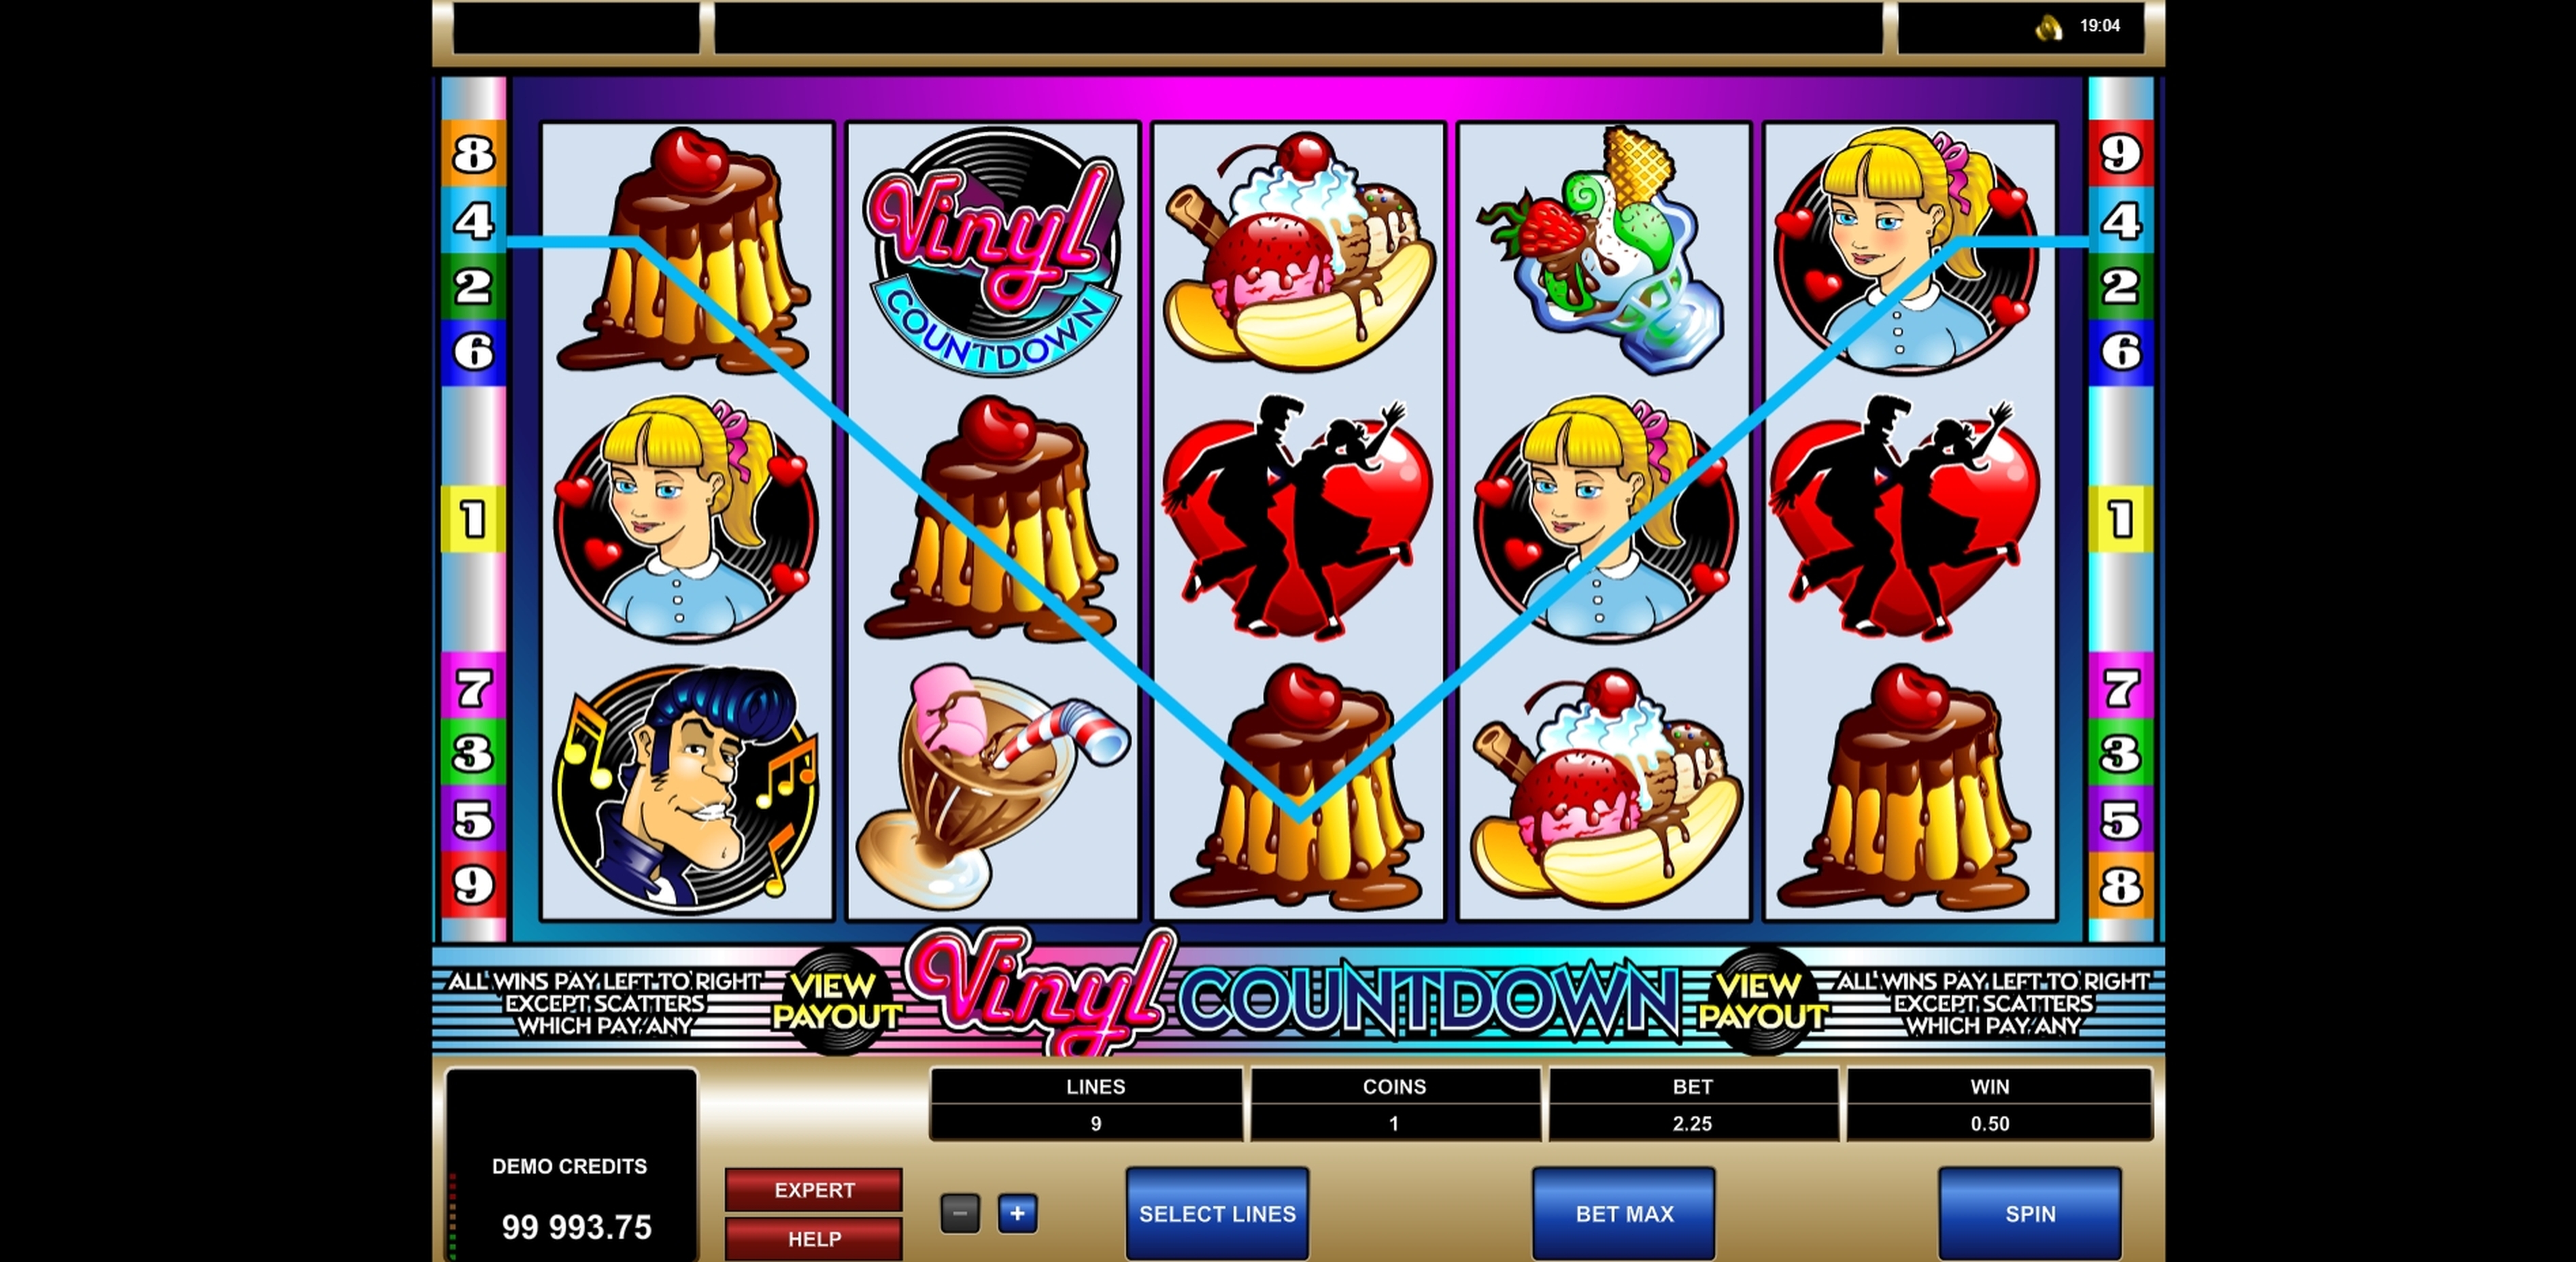 Win Money in Vinyl Countdown Free Slot Game by Microgaming